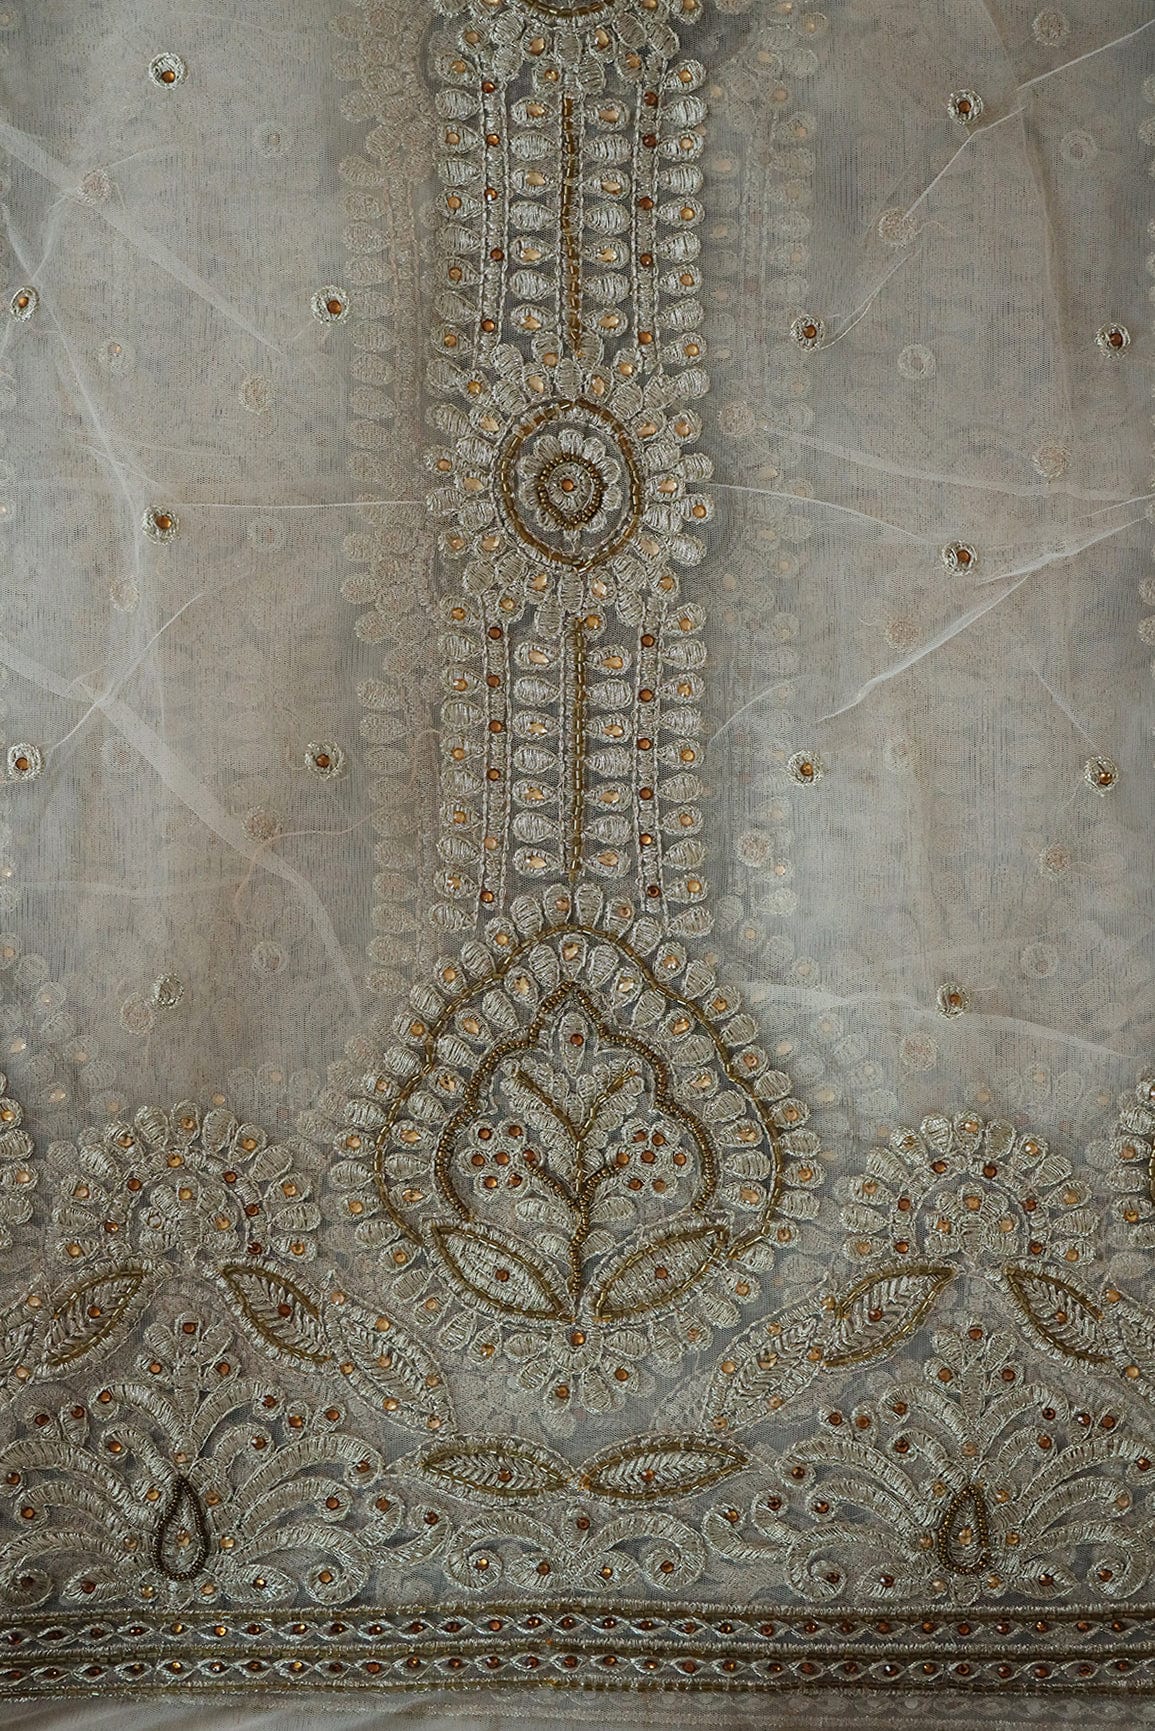 net fabric for blouse,net fabric price,net fabric for dupatta,embroidered net fabric wholesale,golden embroidered net fabric,golden embroidery fabric,silk net fabric